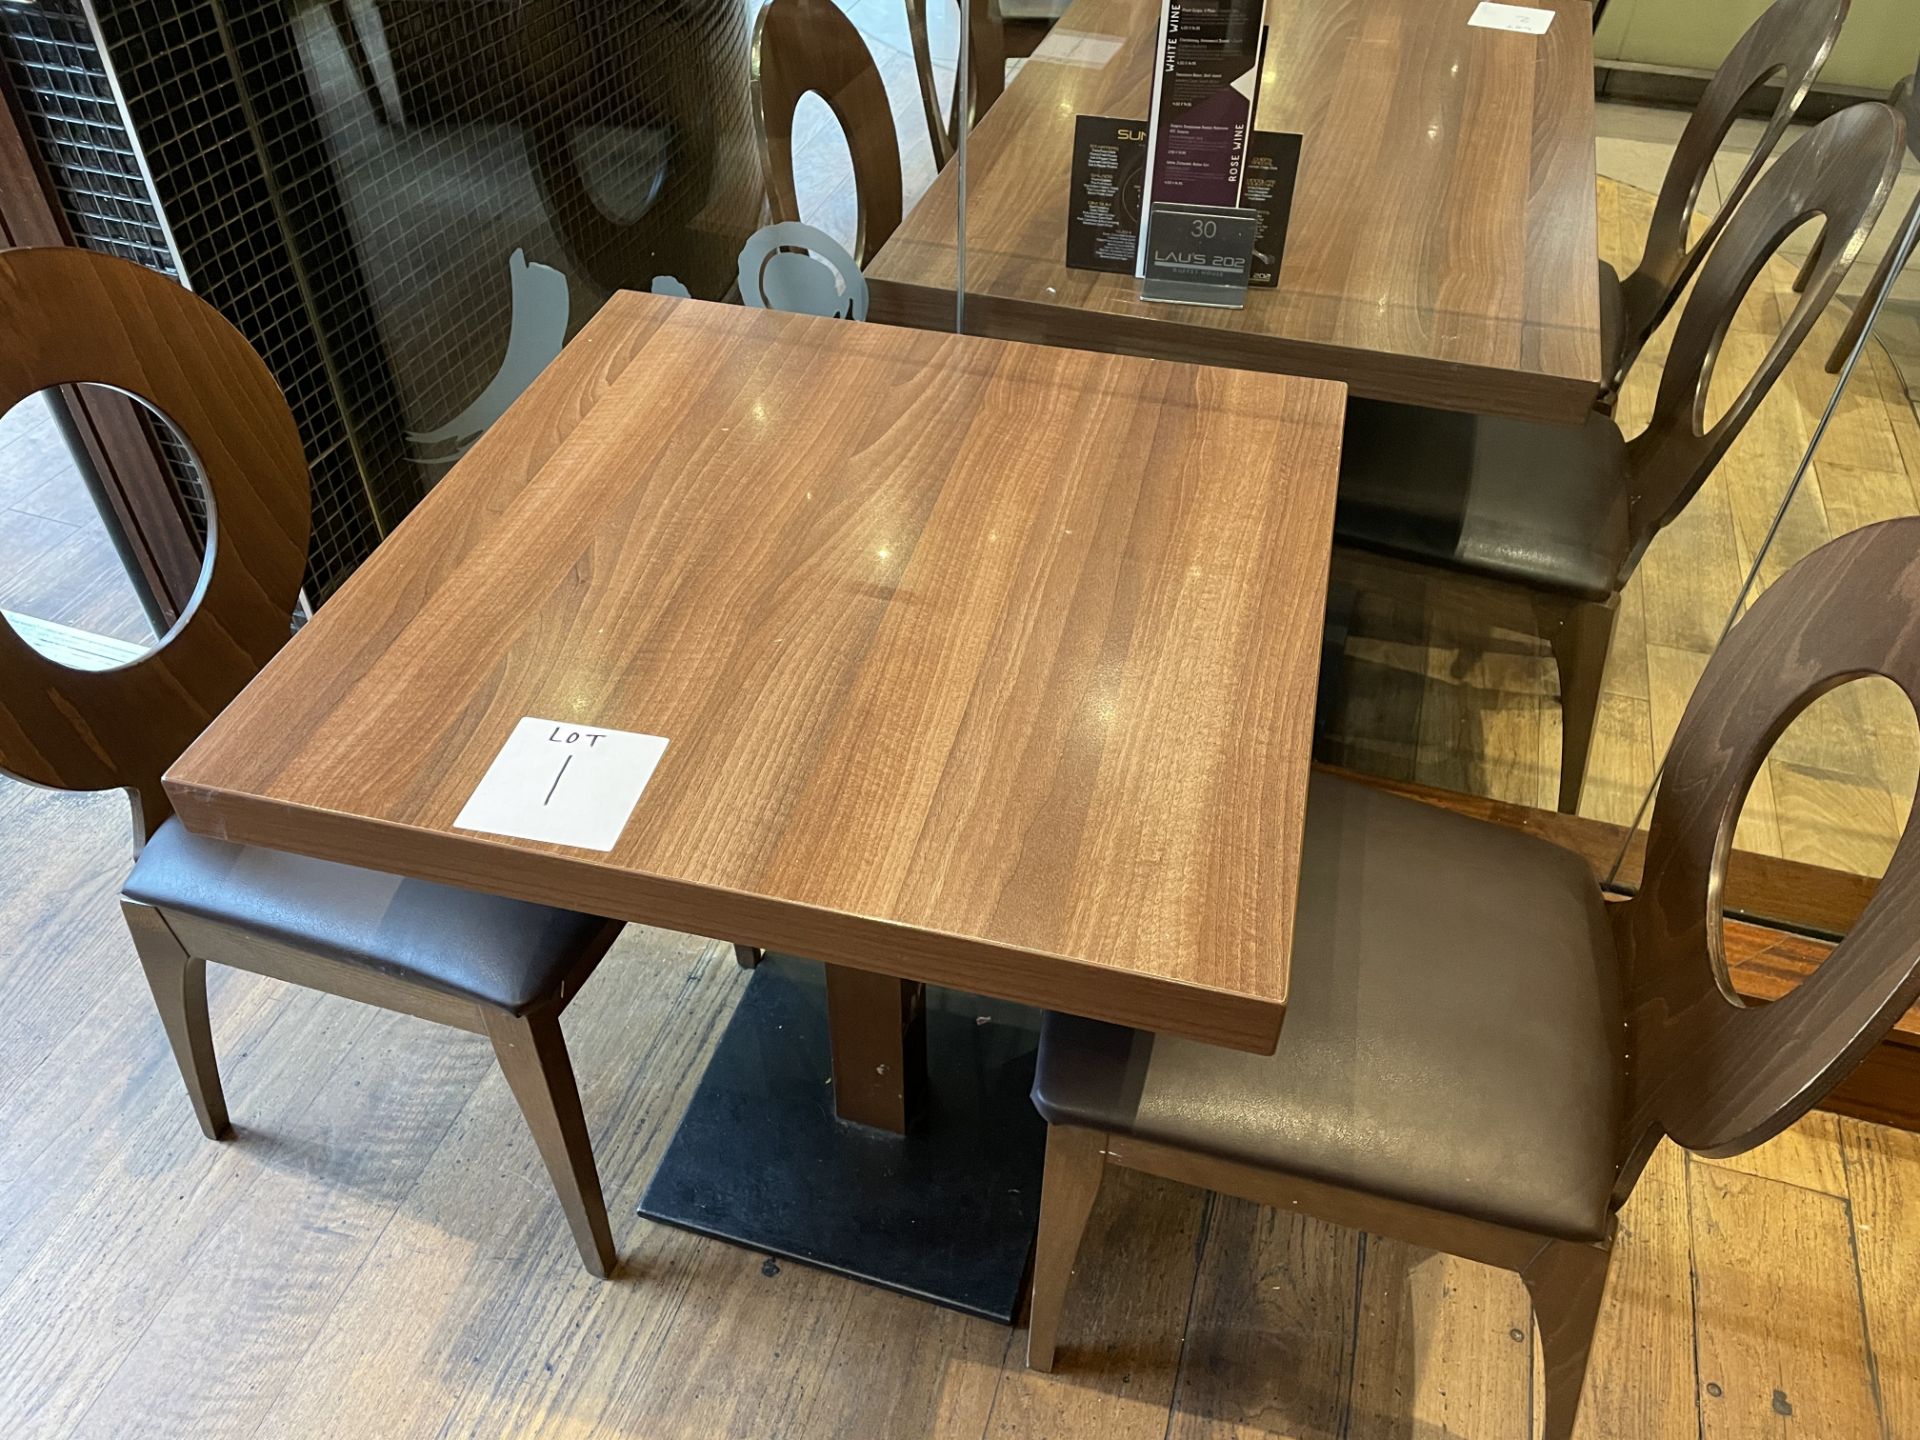 TABLE 700 x 700 - 2 Chairs